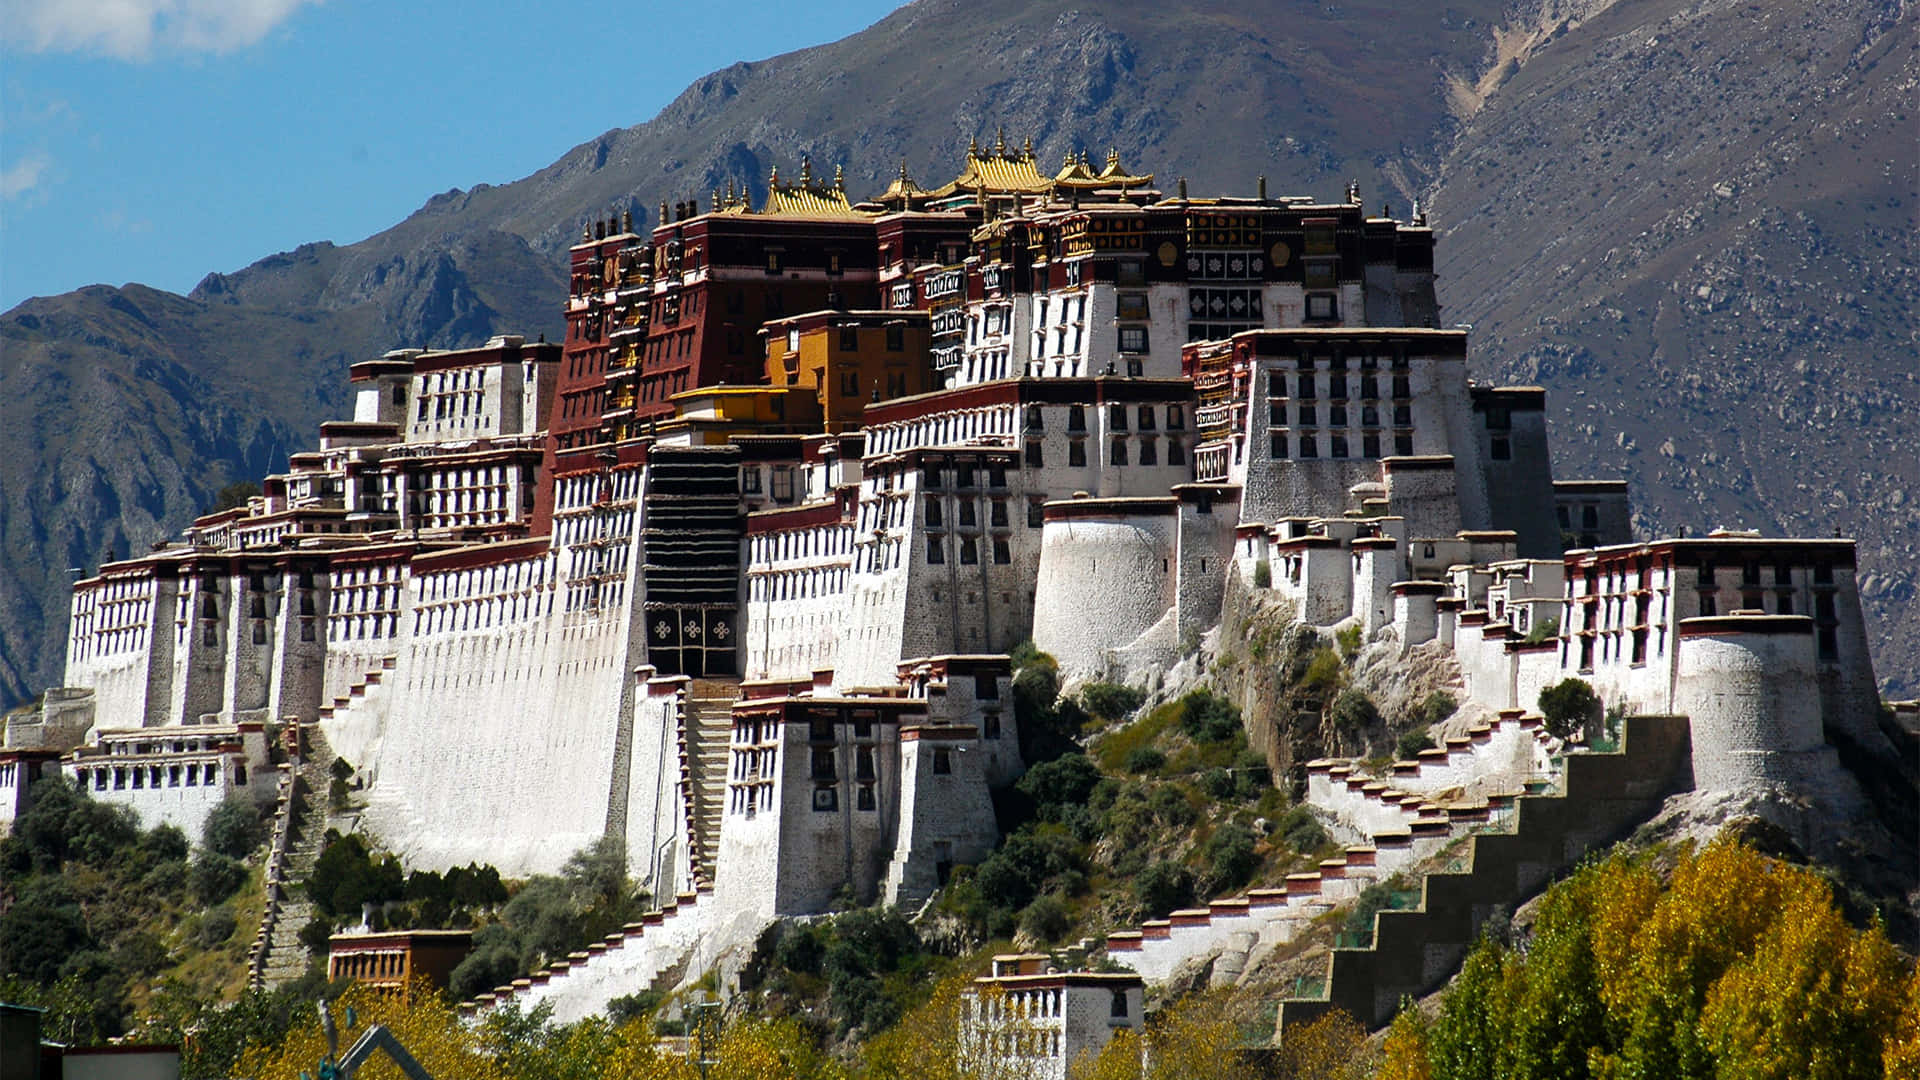 Architectural Buildings In Potala Palace, Lhasa Wallpaper